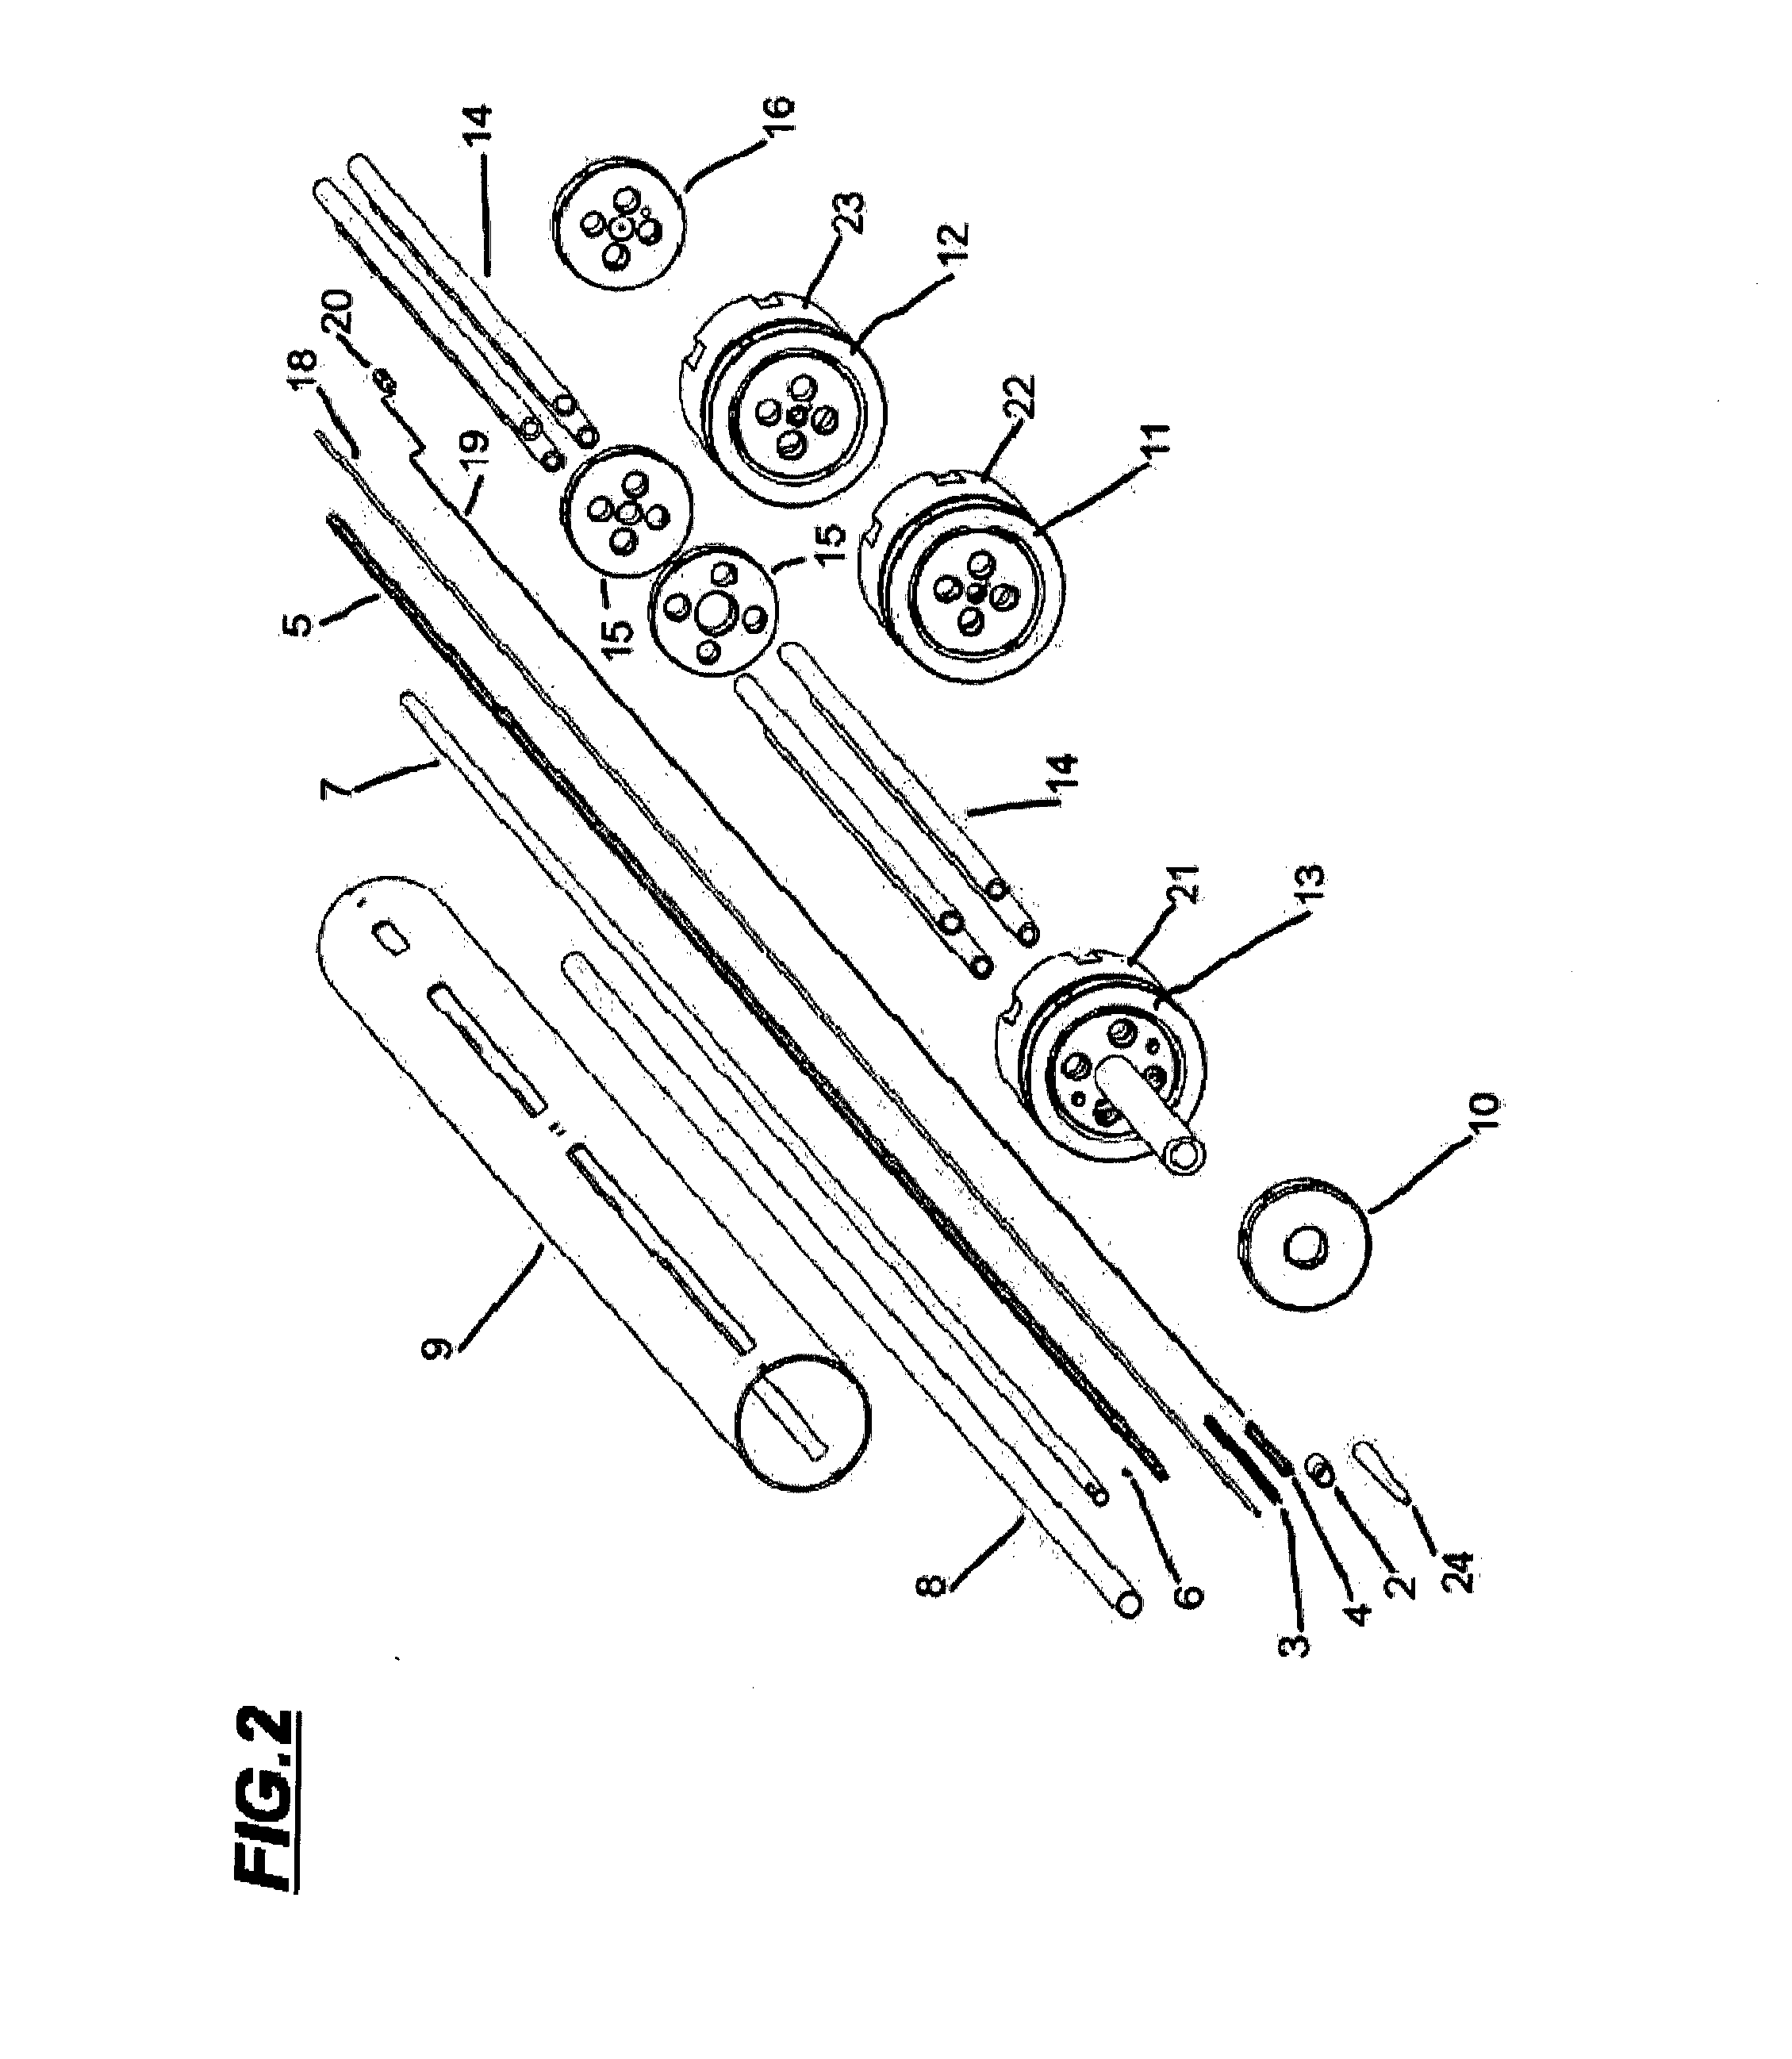 Mechanism for Guiding and or Releasing of an Endoprosthesis with Injured Regions of a Blood Vessel, Applied in Catheter-Like Medical Device